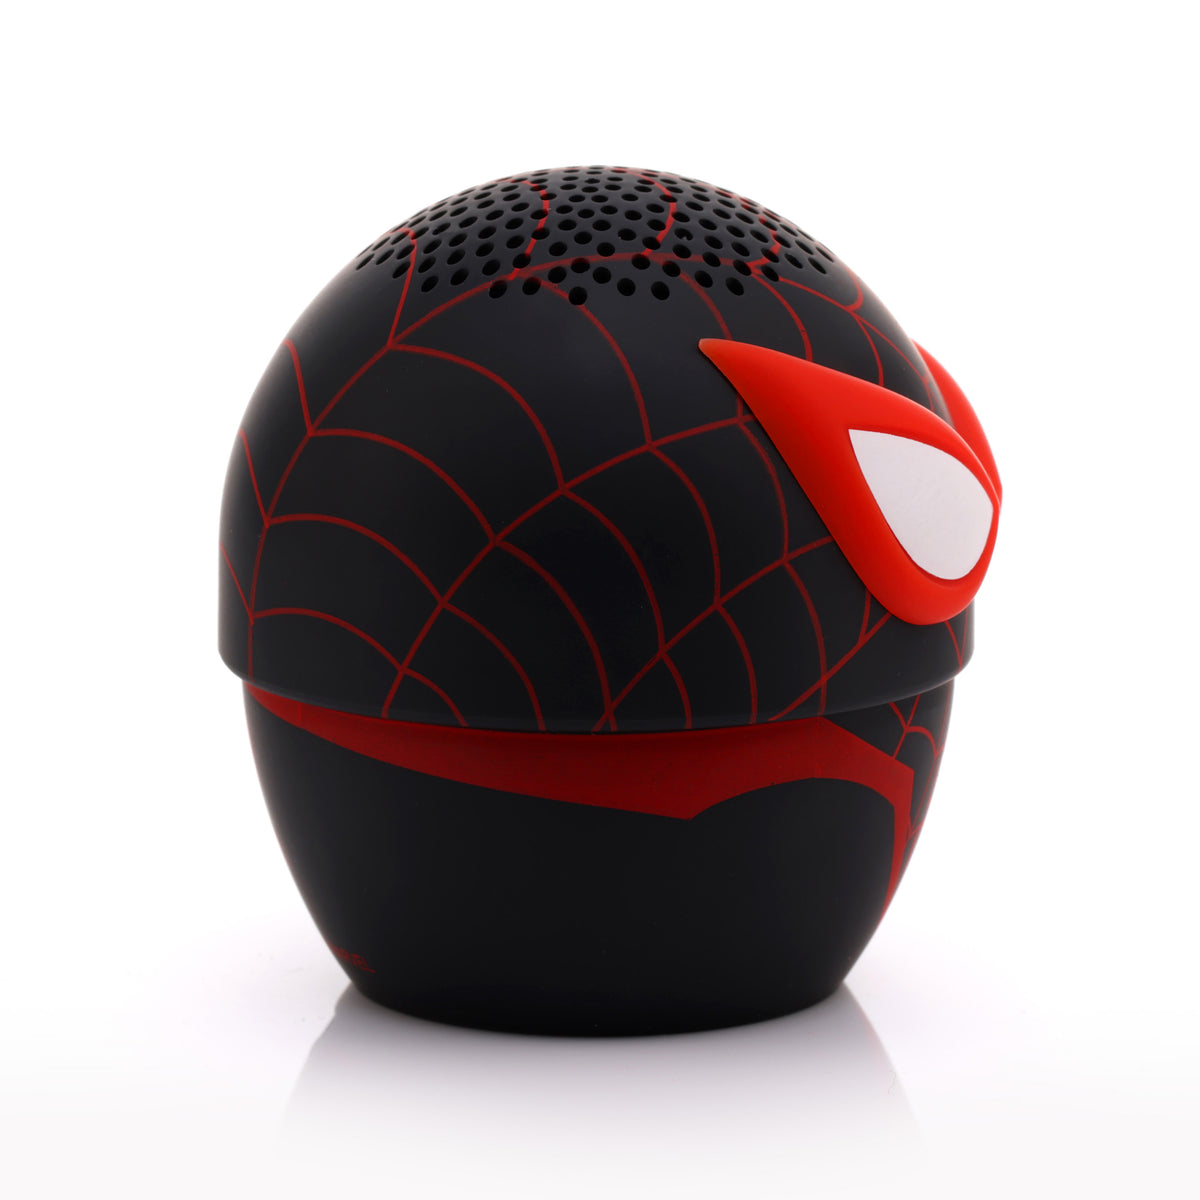 Parlante Bluetooth Portatil Miles Morales Marvel Bitty Boomers